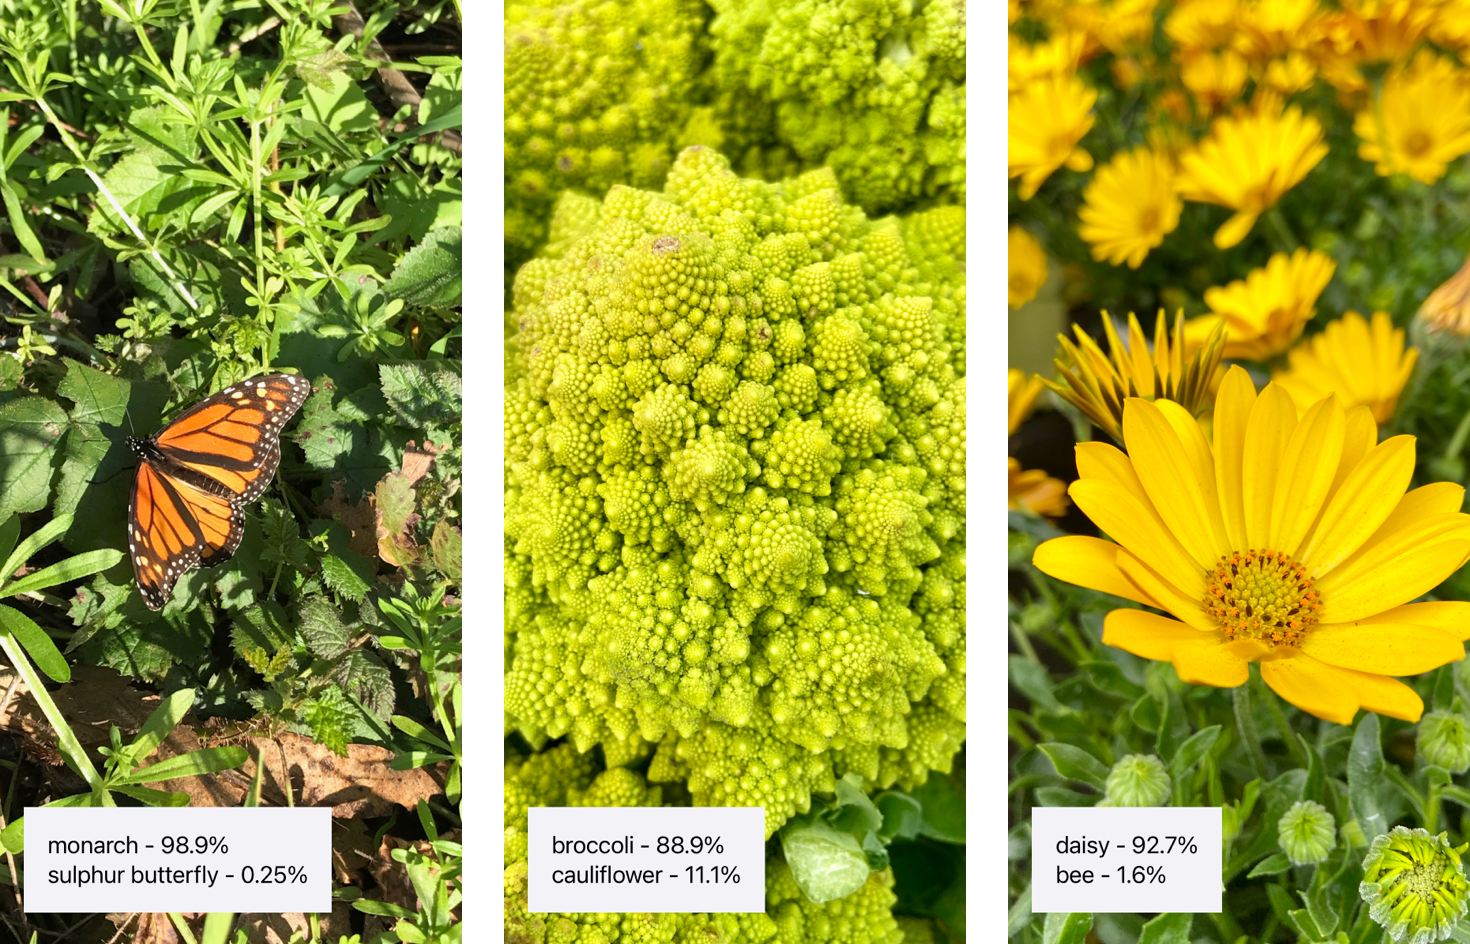 Screenshots of the app identifying a monarch butterfly, broccoli, and a daisy in a field.